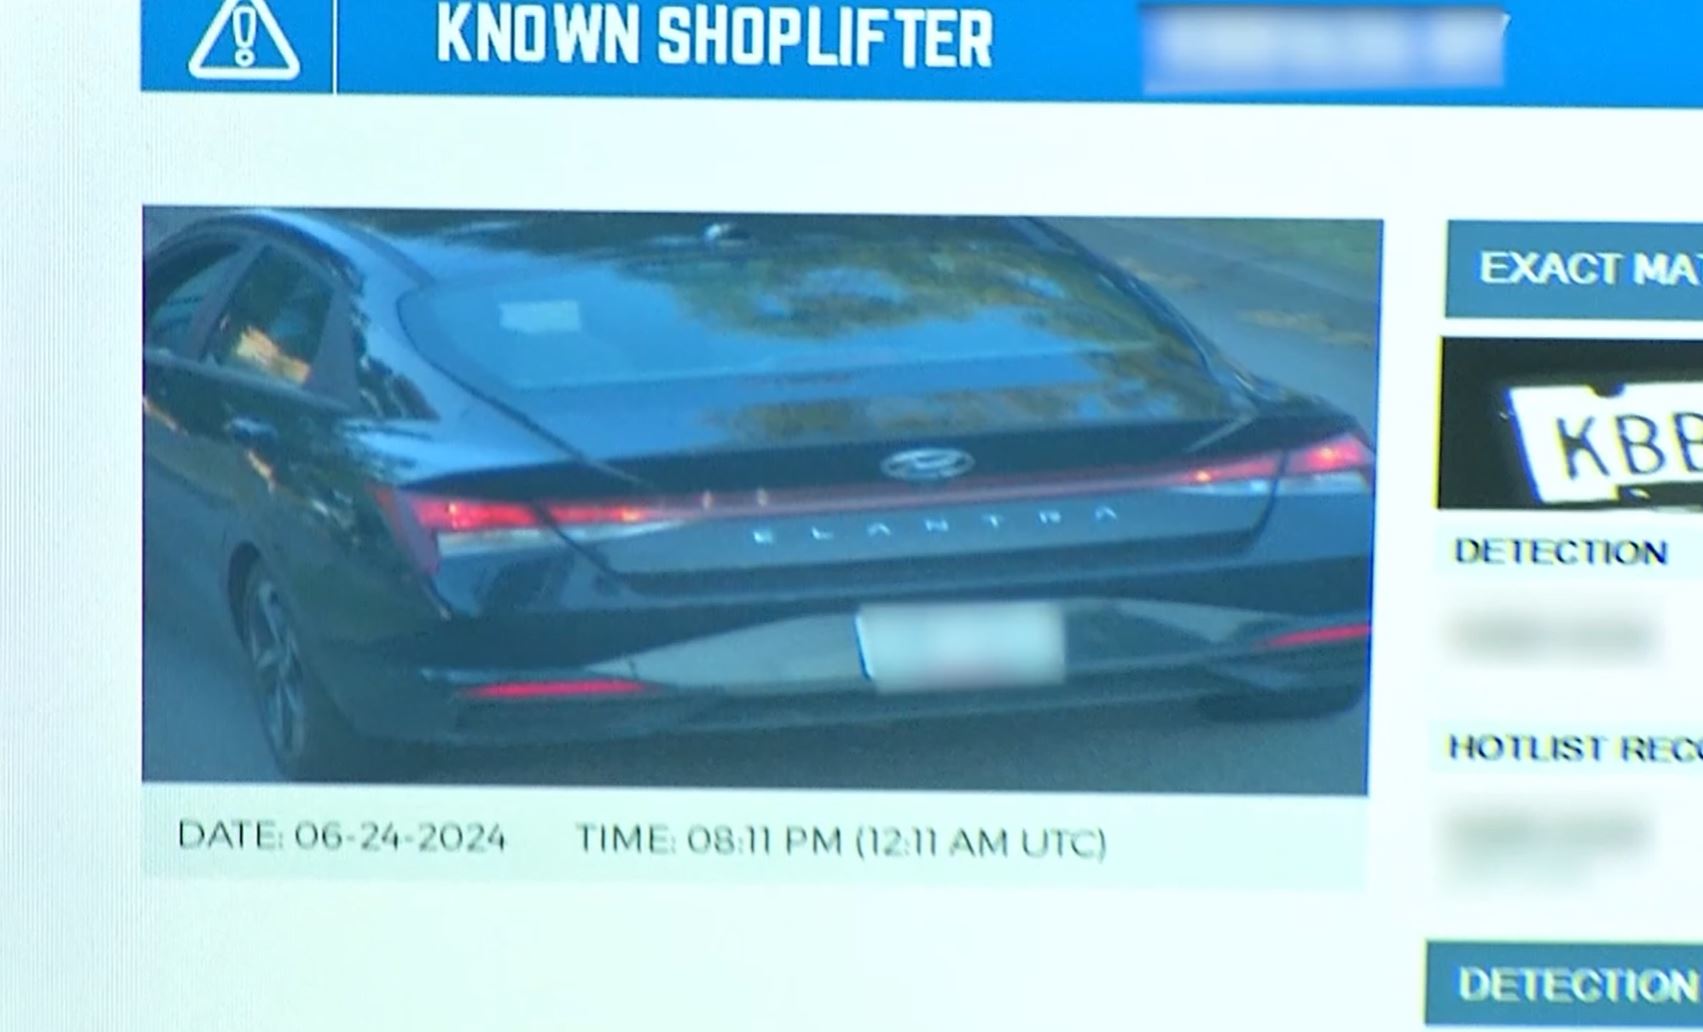 Malls and law enforcement collaborate to address shoplifting issue using advanced technology